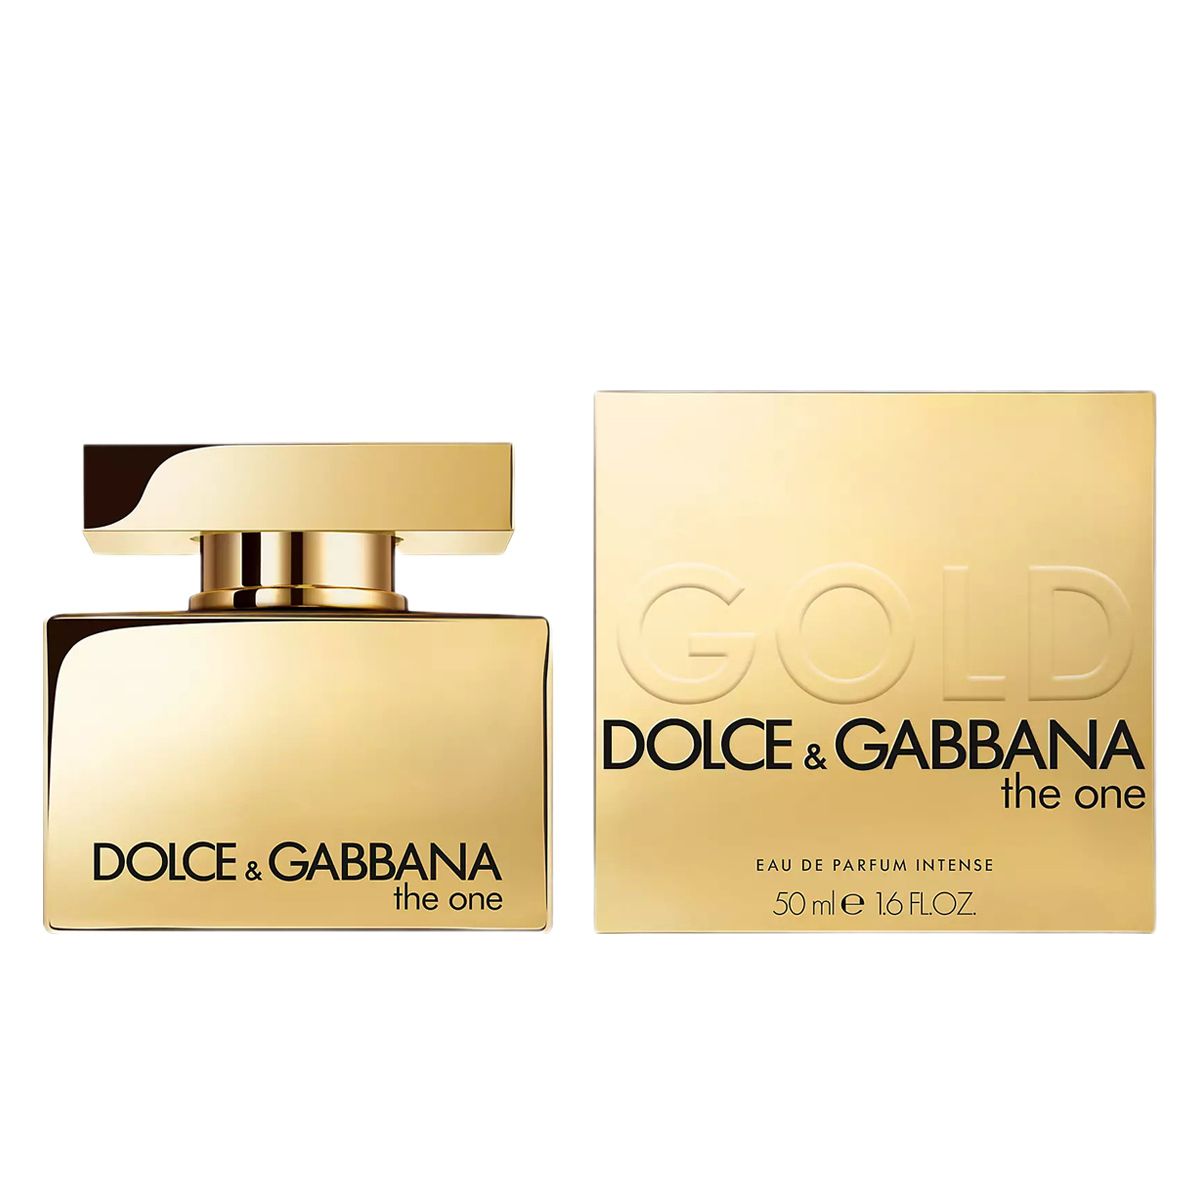  Dolce & Gabbana The One Gold For Women 